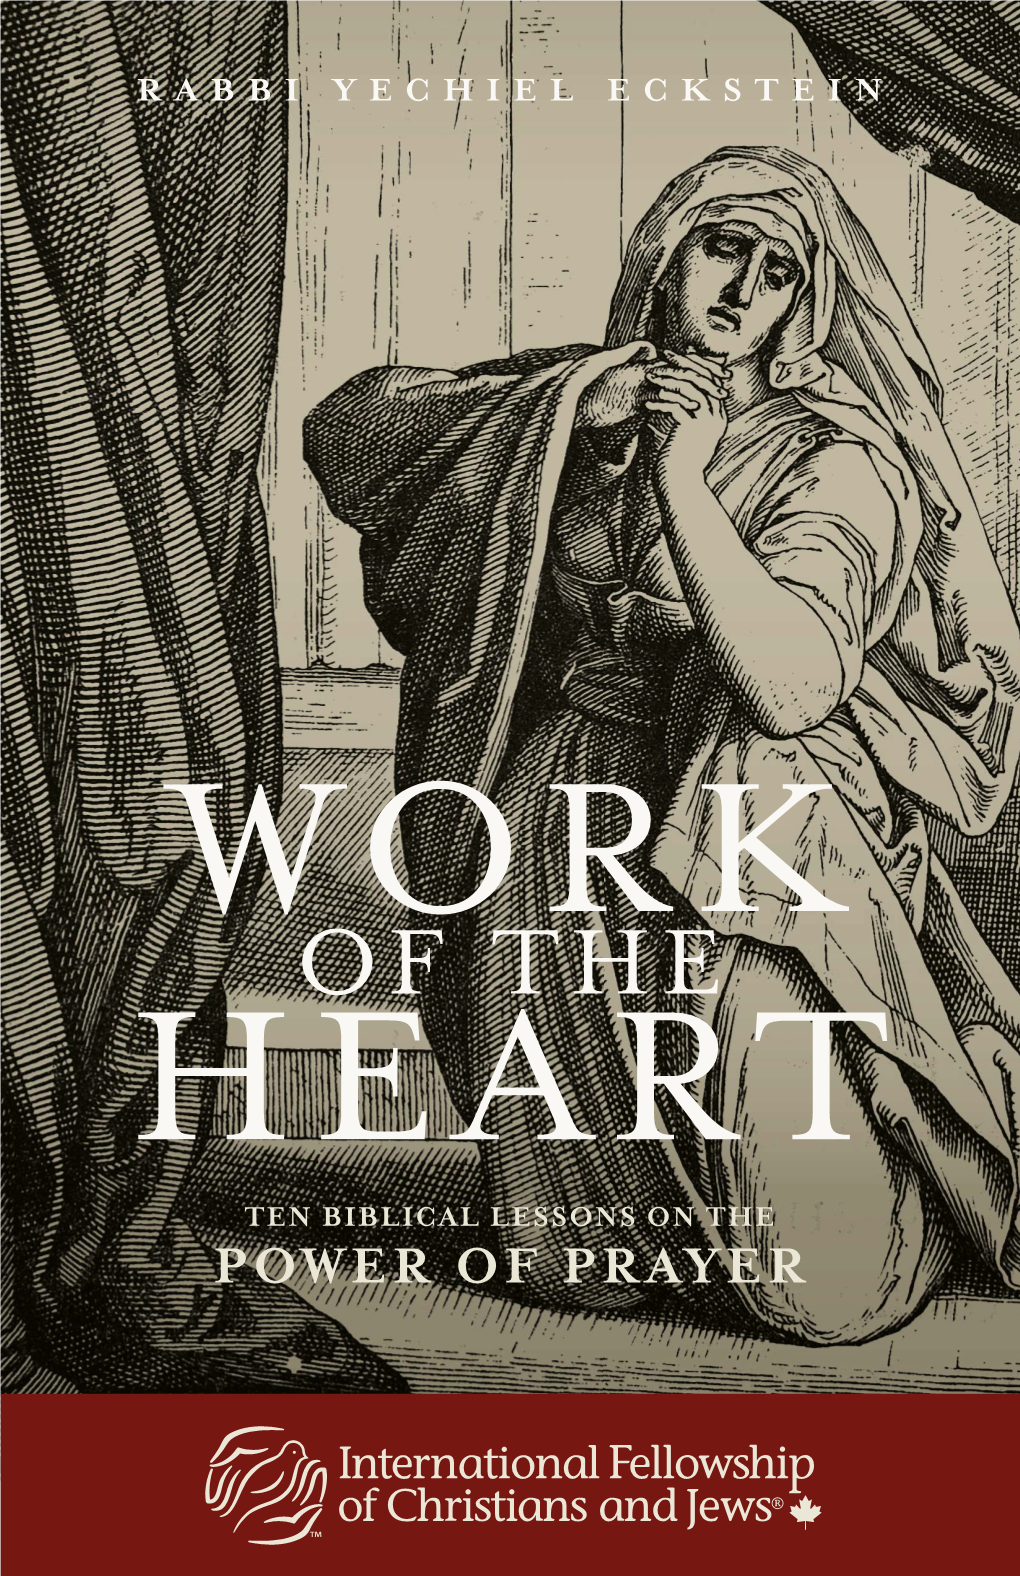 Of the Heart Ten Biblical Lessons on the Power of Prayer